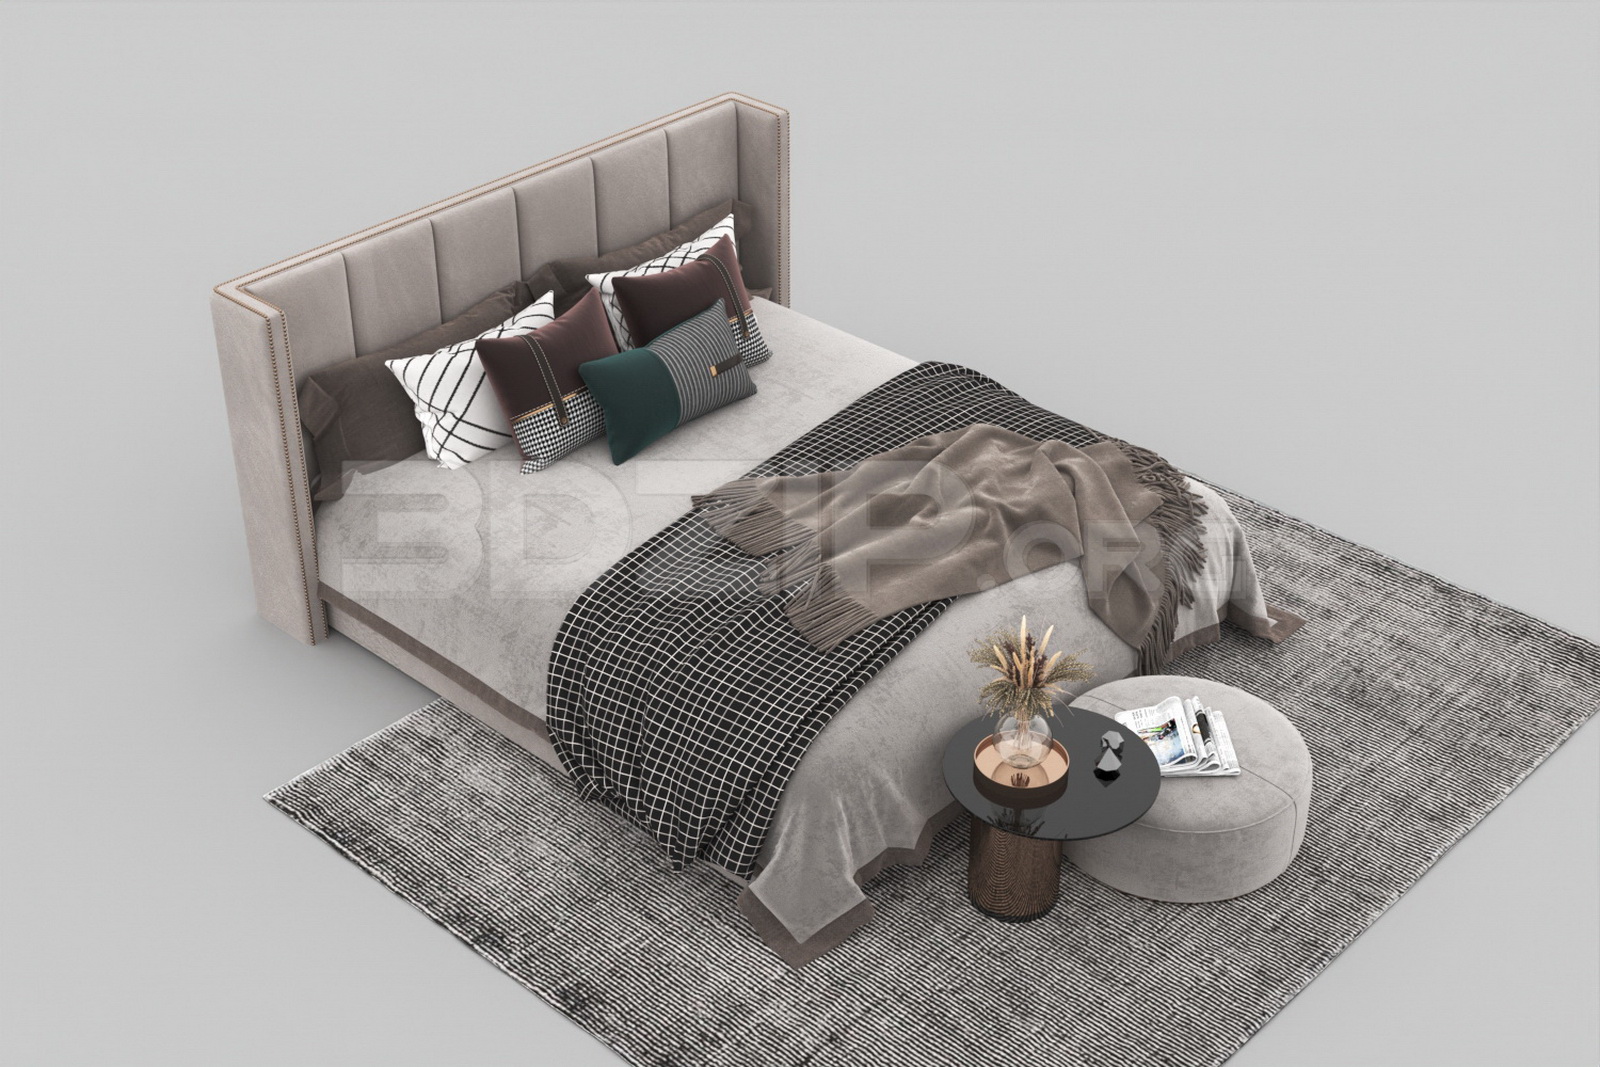 540. Download Free Bed Model By Huy Hieu Lee